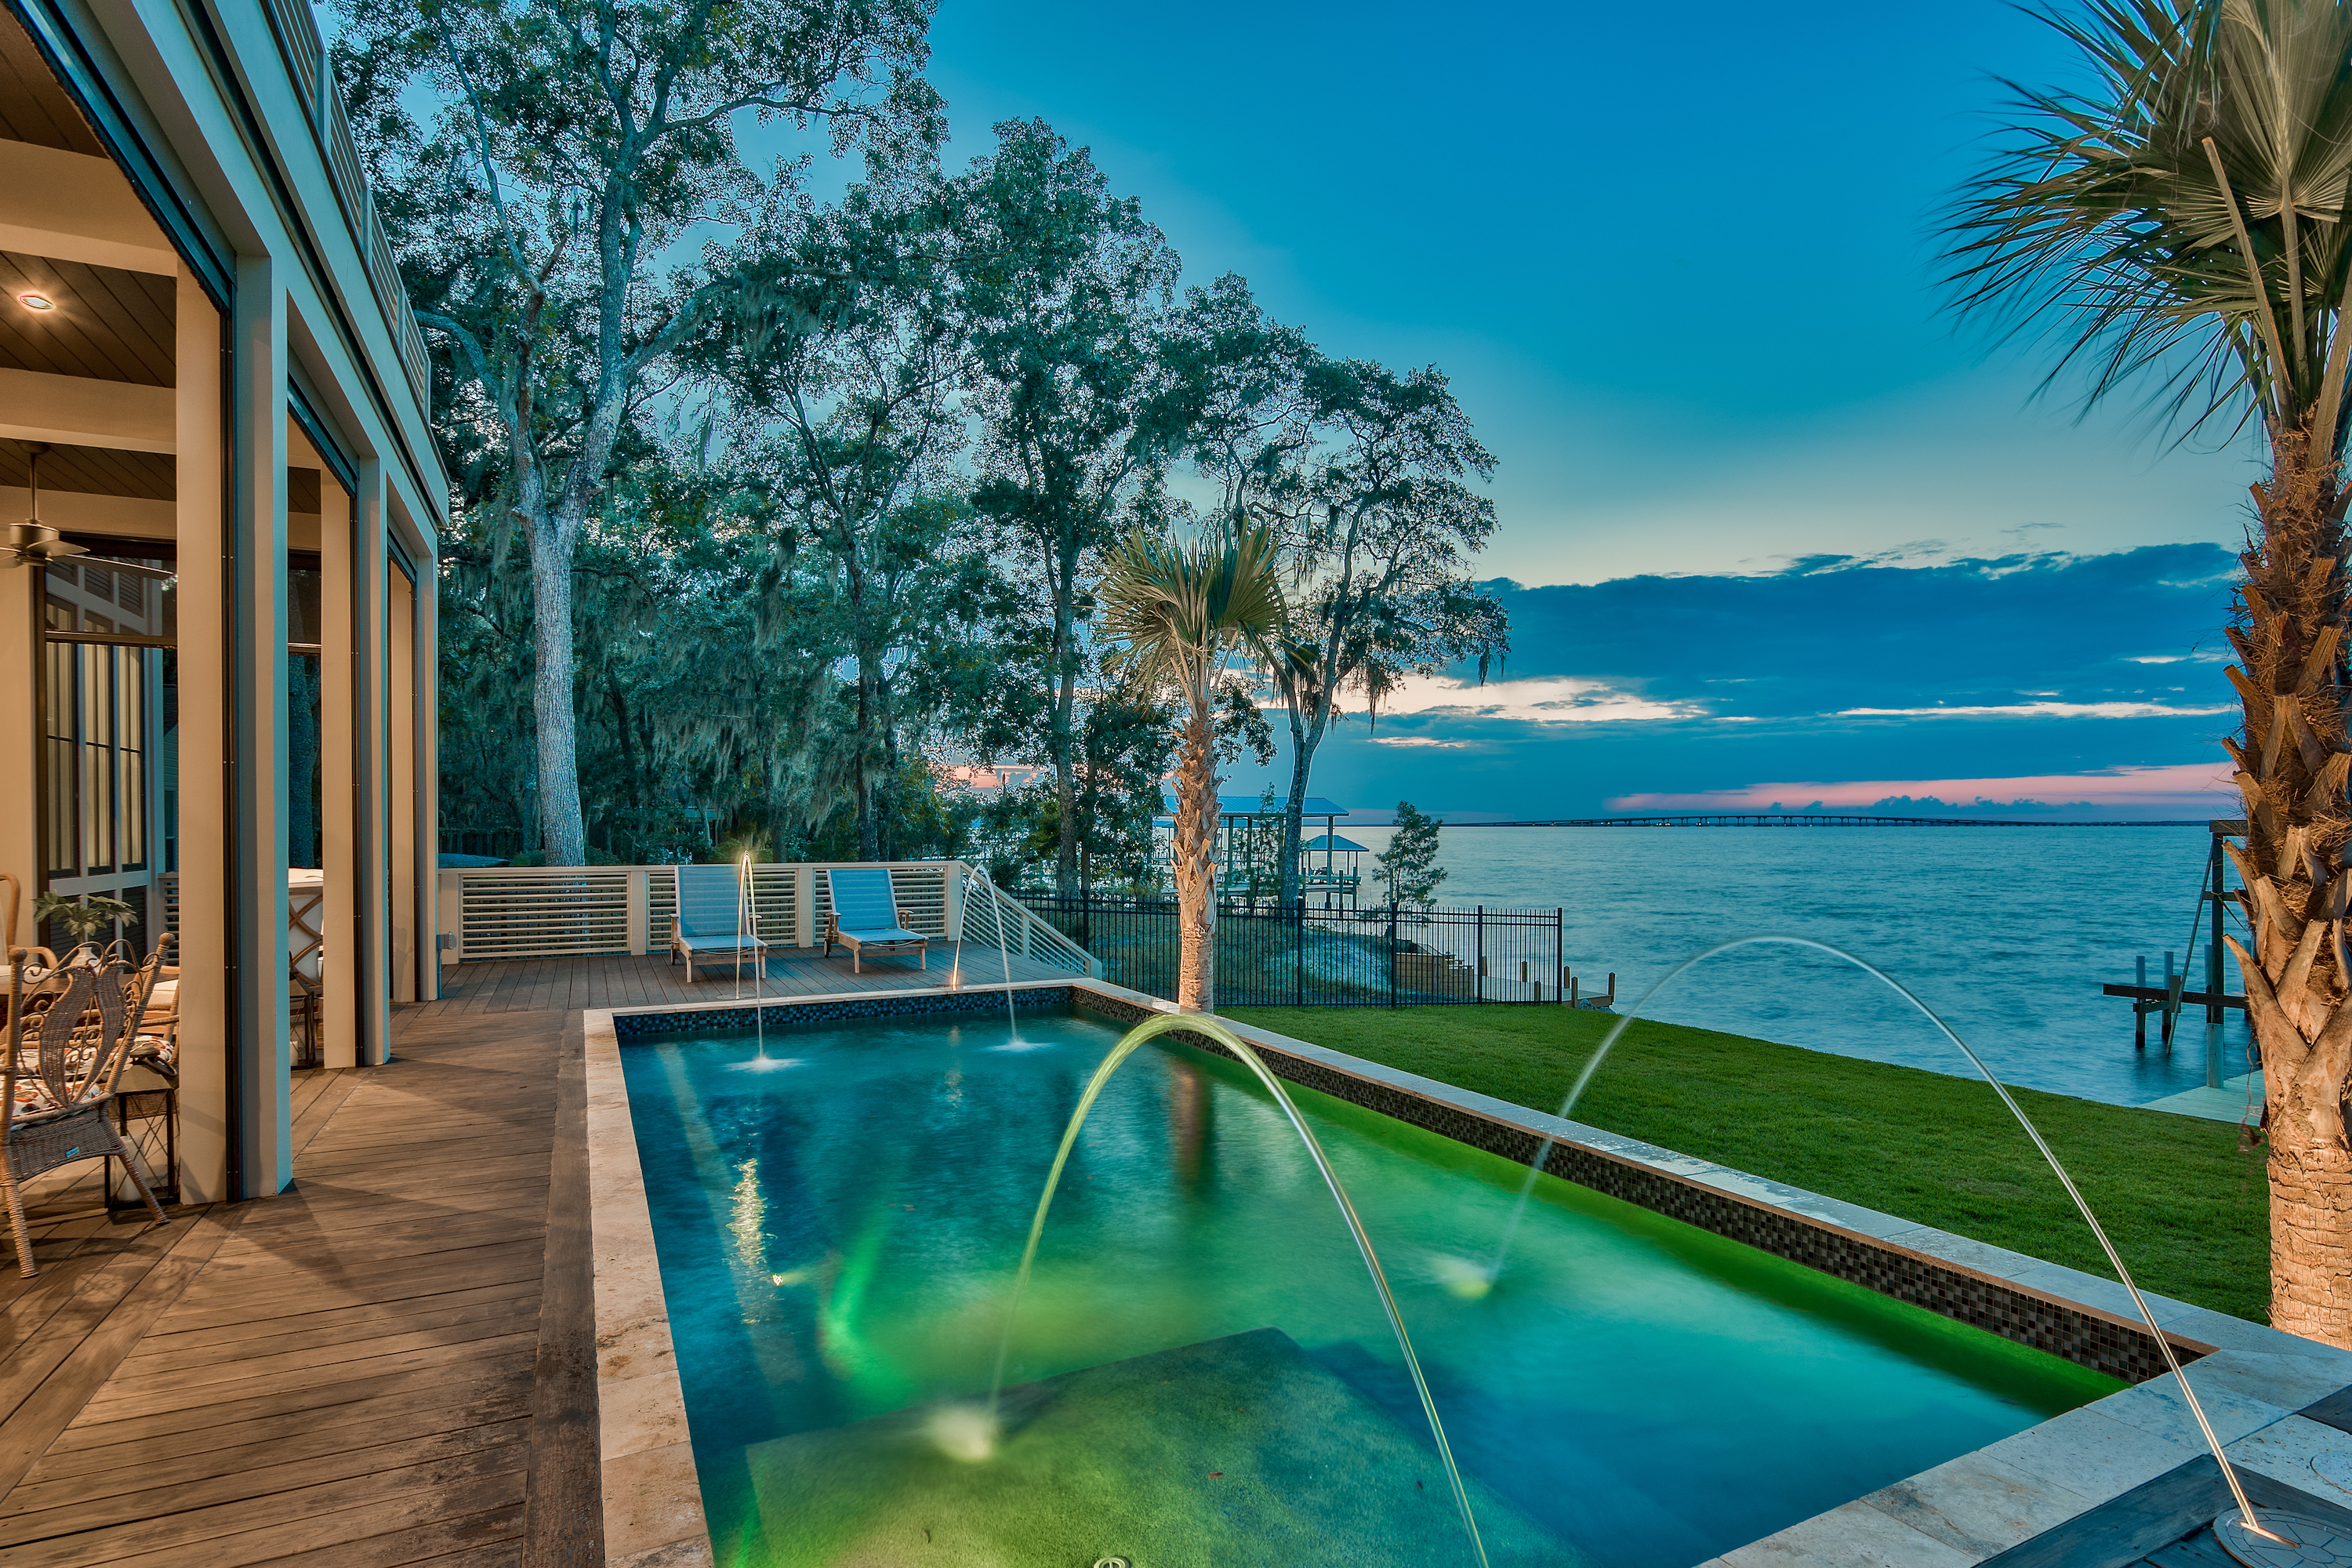 A quiet evening overlooking the bay from the private pool of a bay front home in Santa Rosa Beach